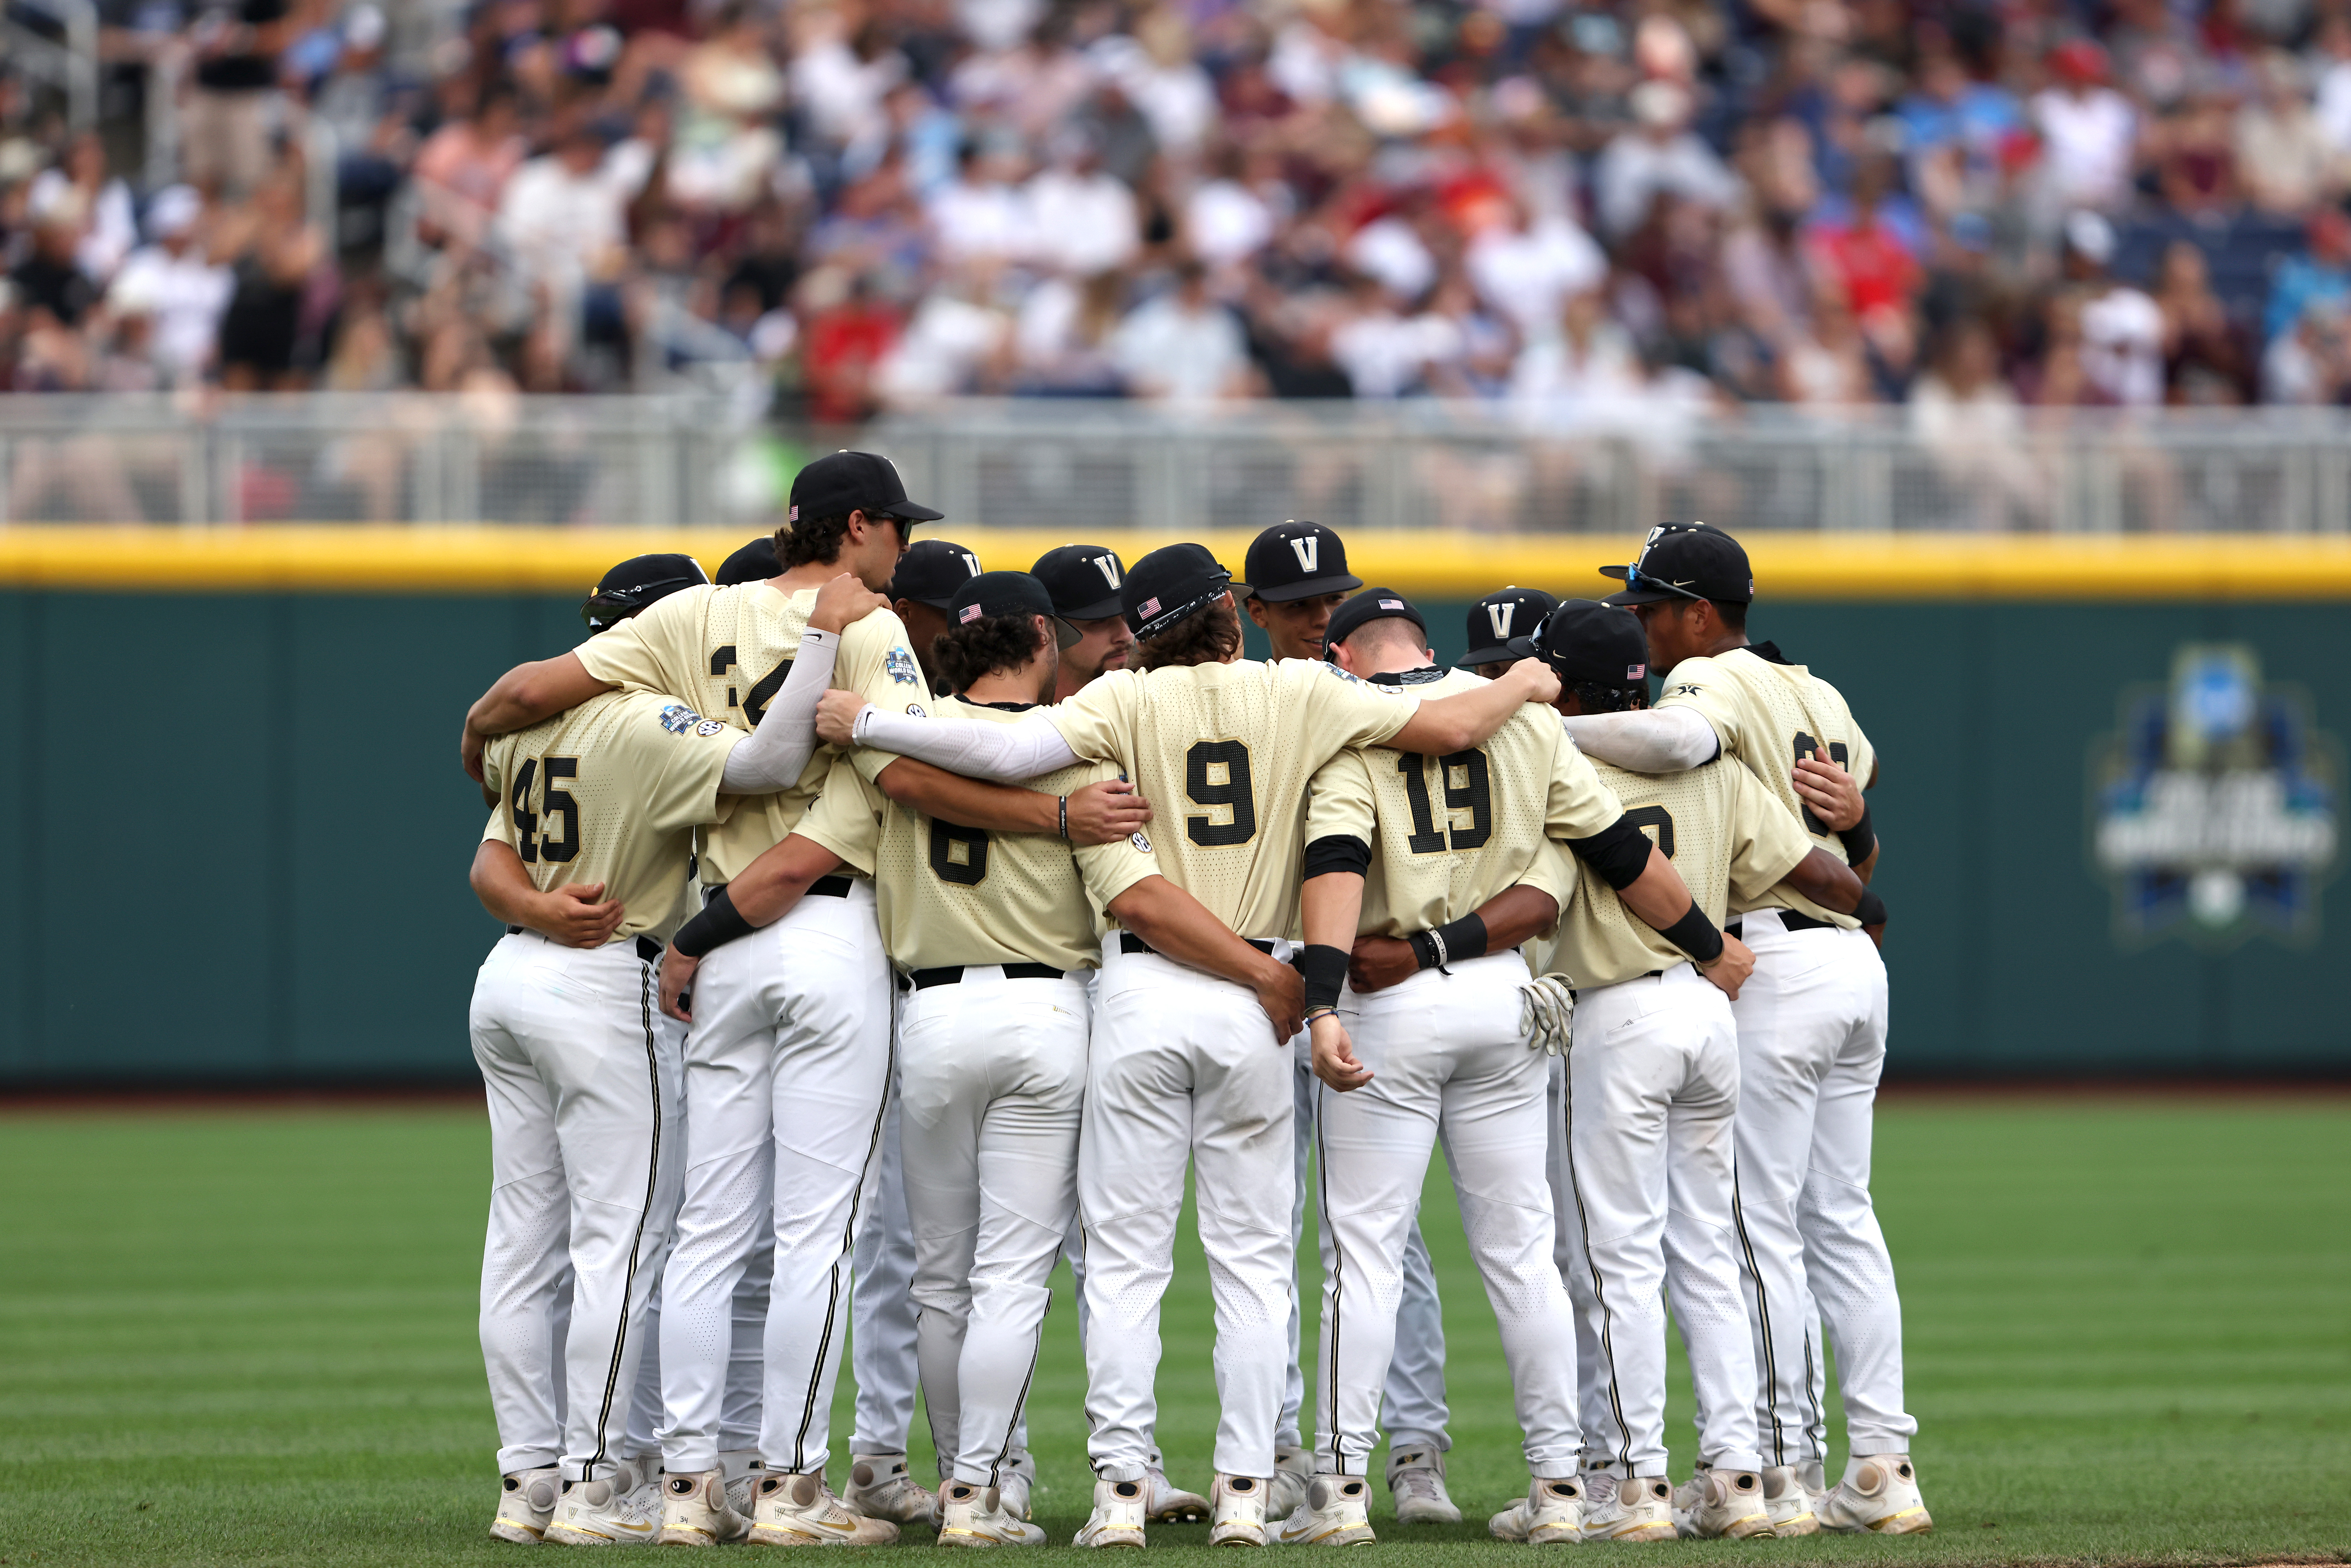 CWS Game 2 live stream (6/28) How to watch Miss